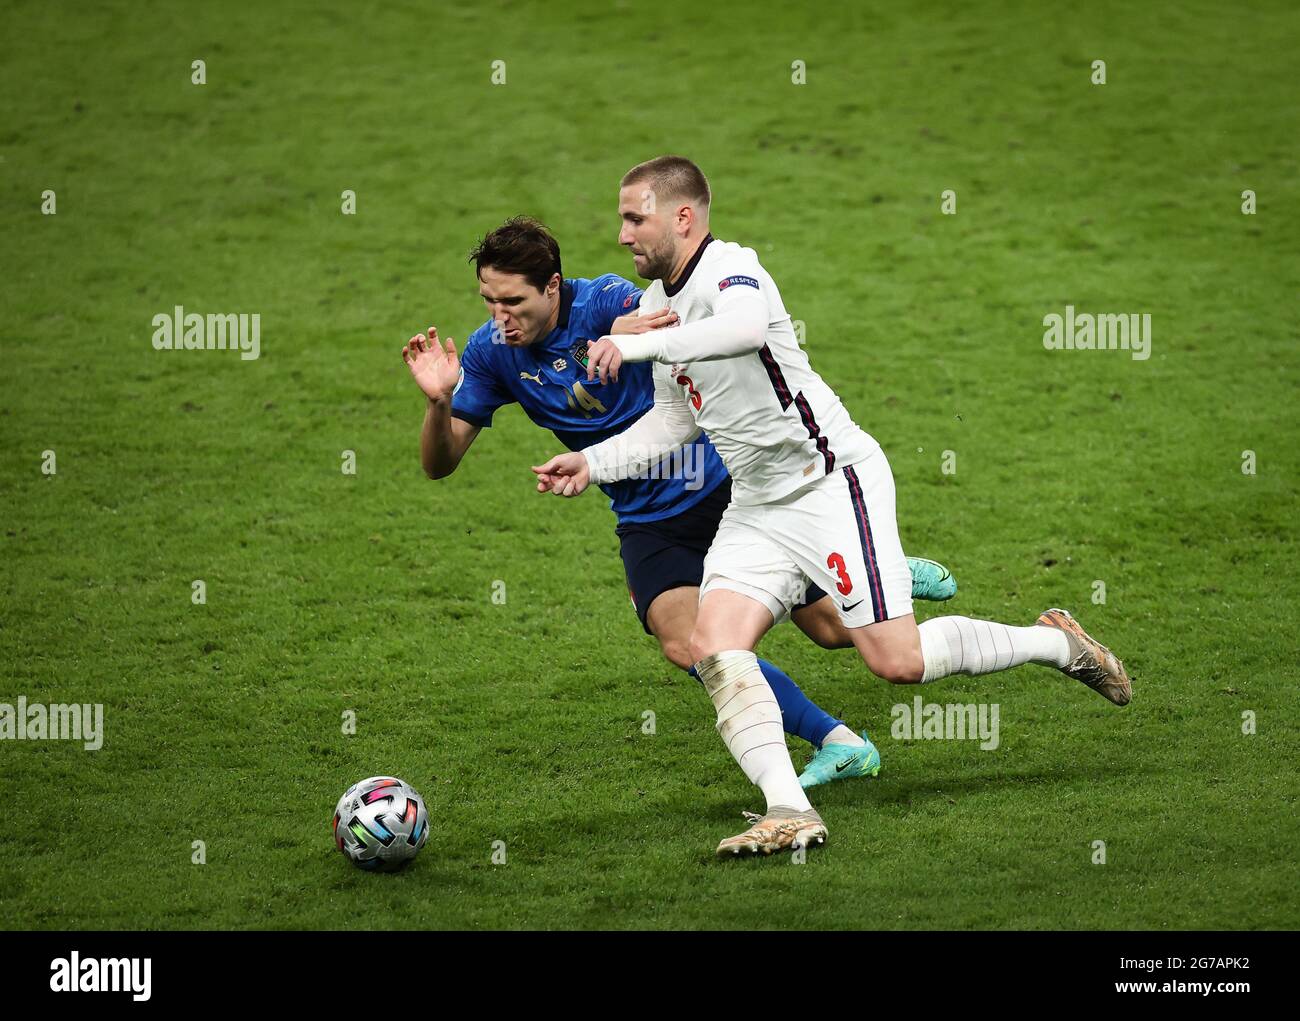 London, UK. 11th July, 2021. Football: European Championship, Italy - England, final round, final at Wembley Stadium. England's Luke Shaw (r) and Italy's Federico Chiesa in action. Credit: Christian Charisius/dpa/Alamy Live News Stock Photo